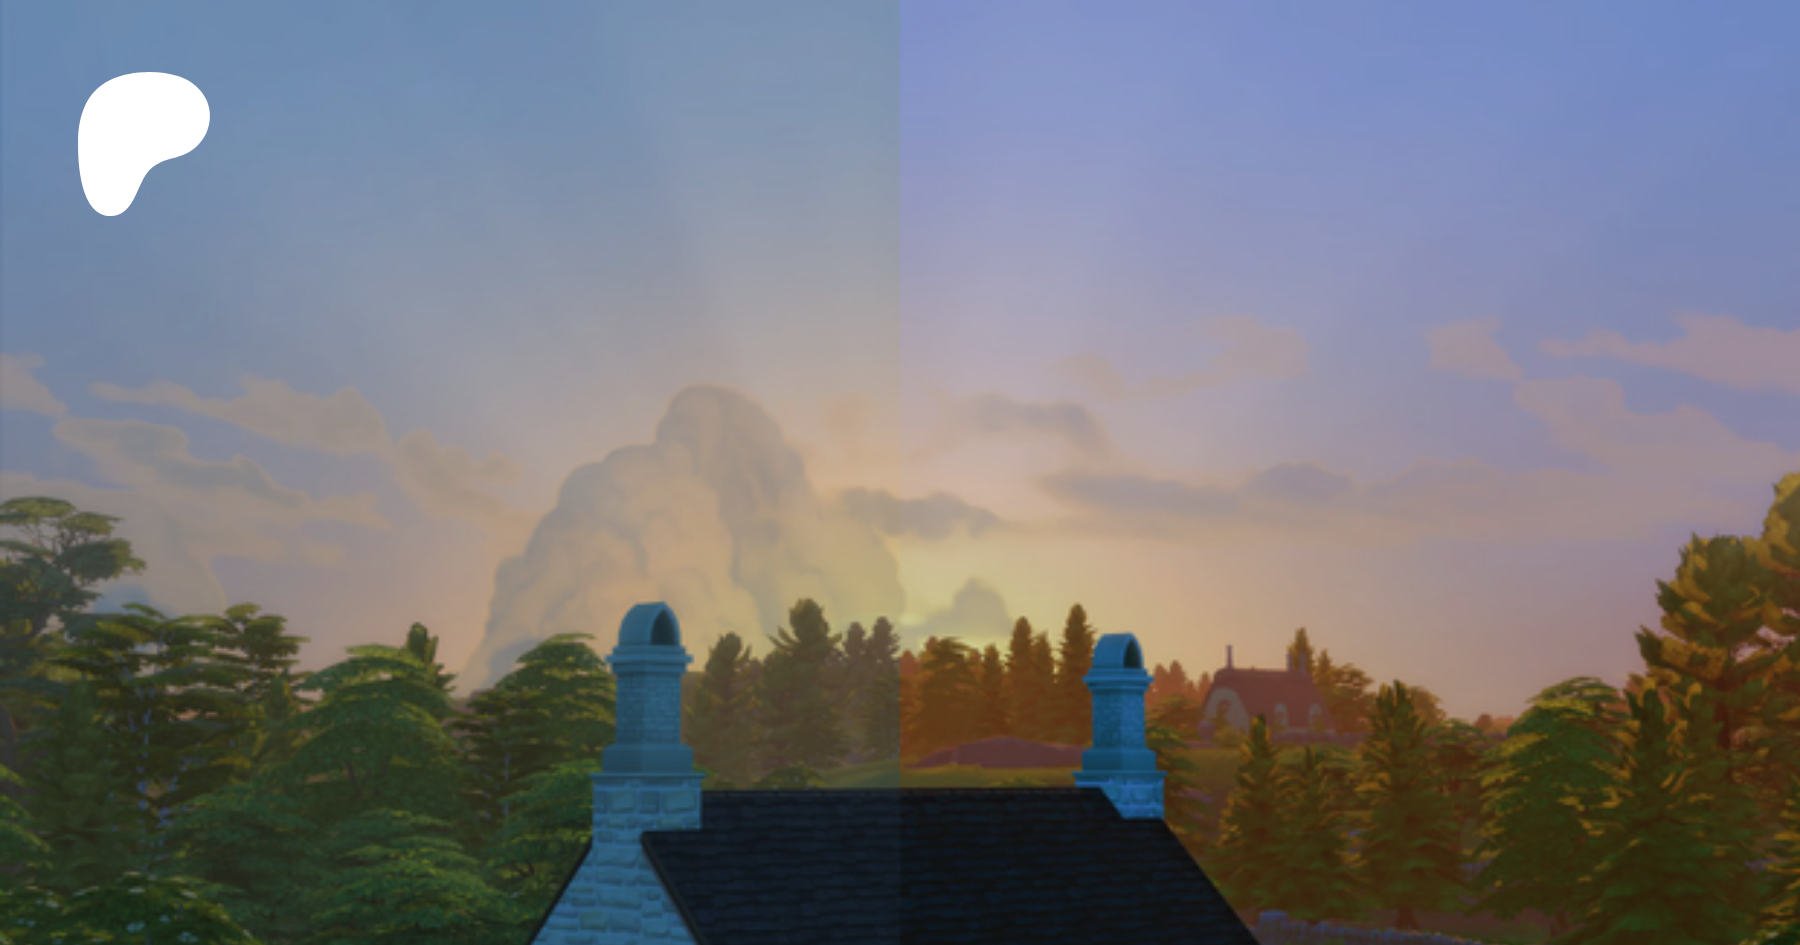 ✿ Pickypikachu ✿ — Here is a smoothing preset for Reshade 3.0.6. This